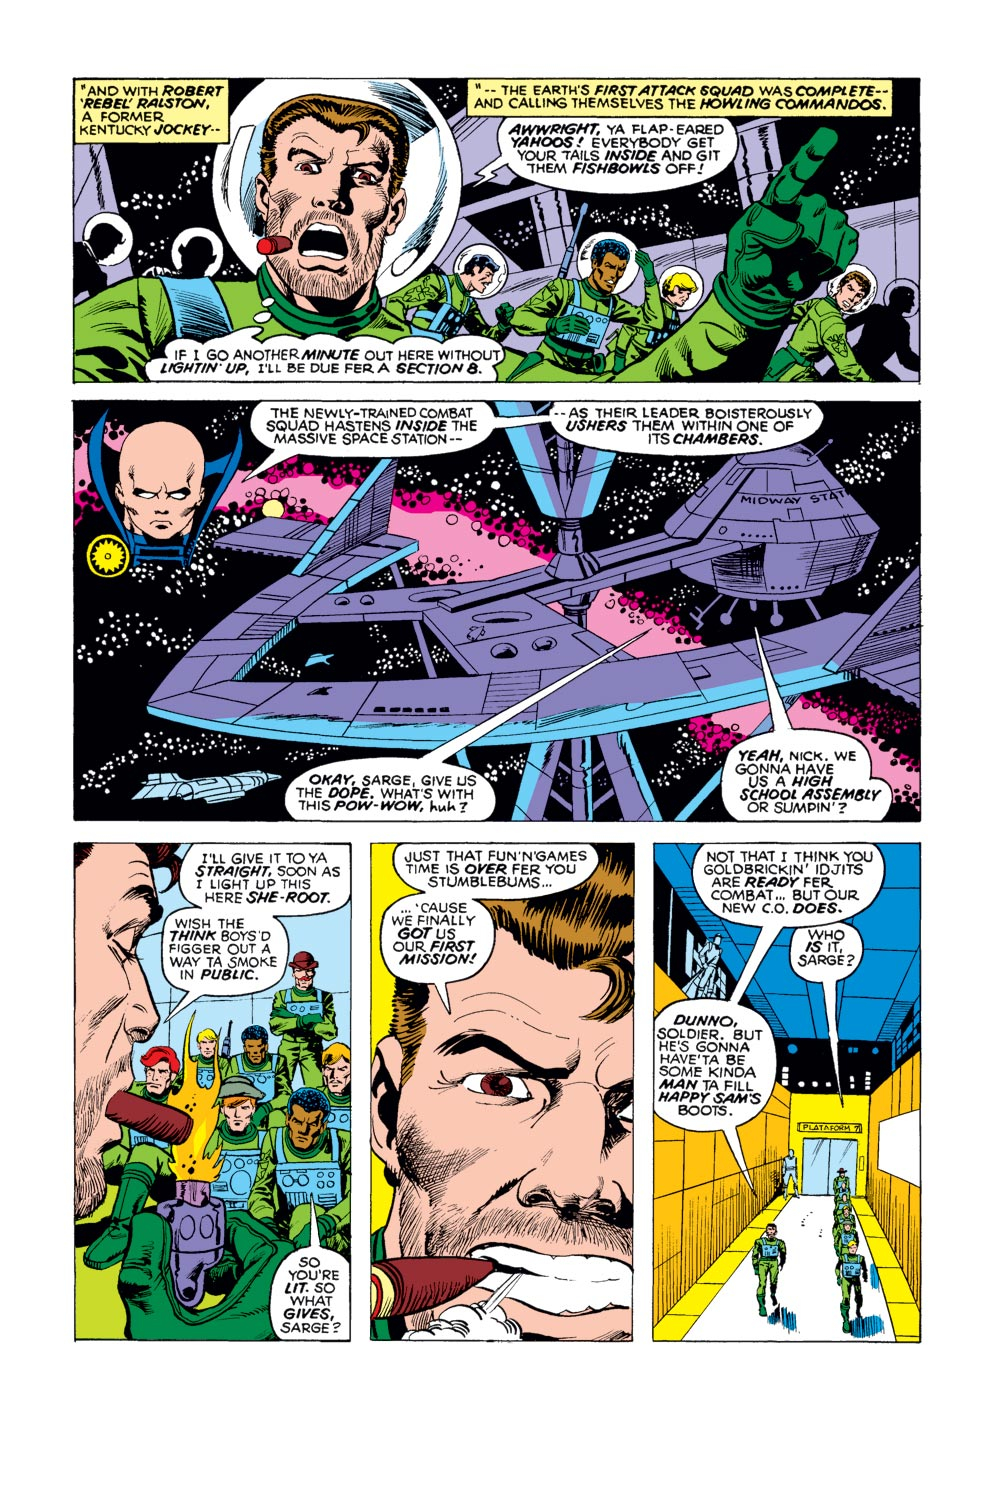 What If? (1977) issue 14 - Sgt. Fury had Fought WWII in Outer Space - Page 14